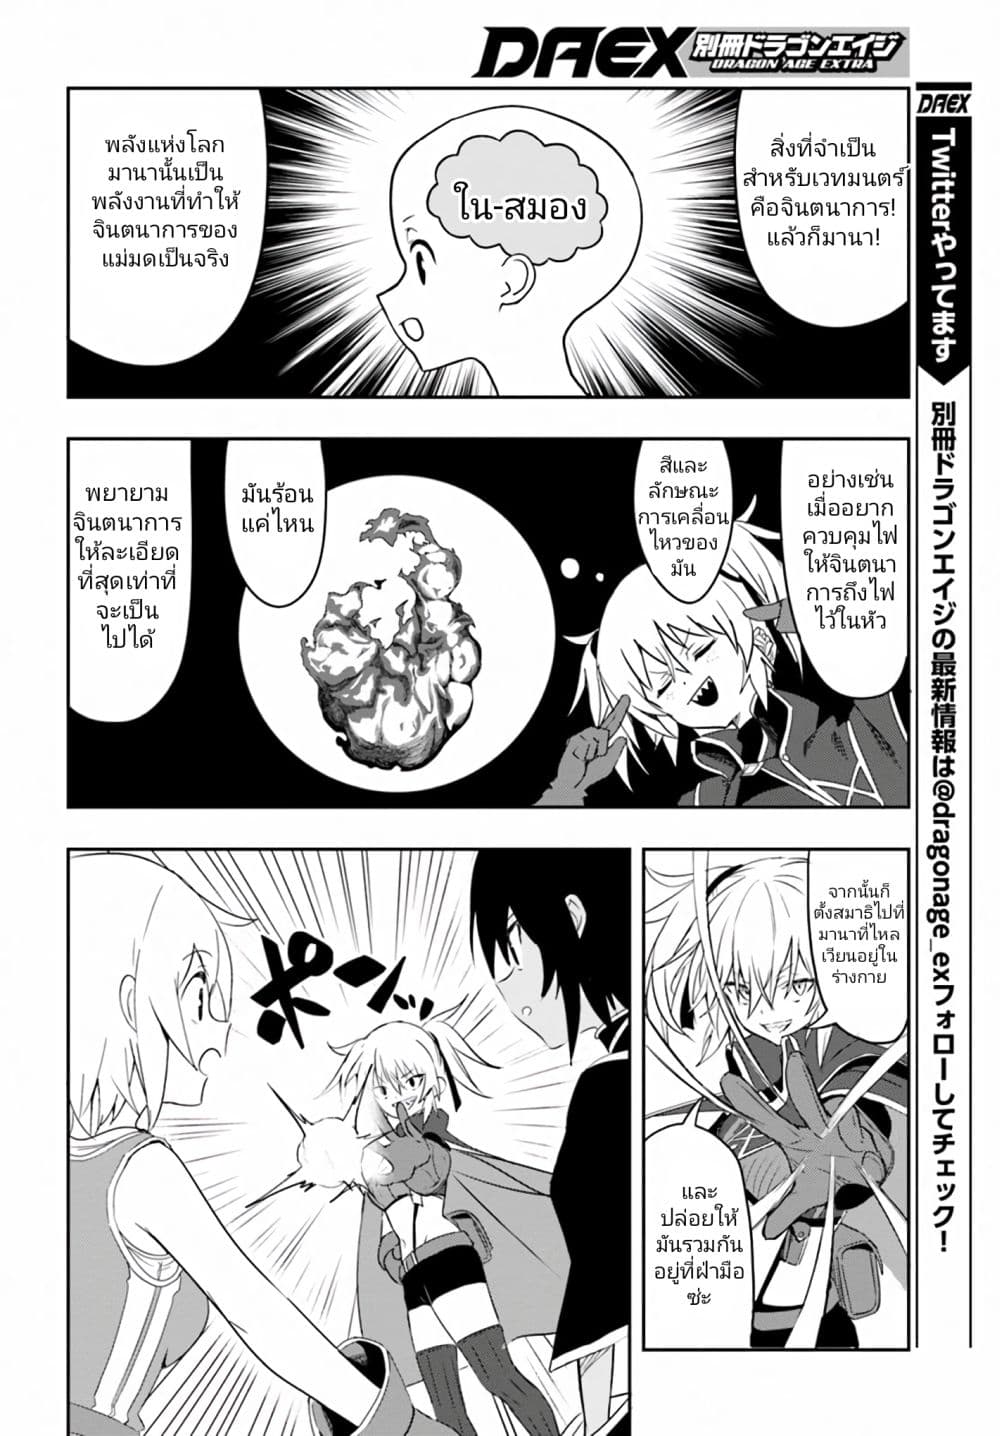 Witch Guild Fantasia 6 (18)